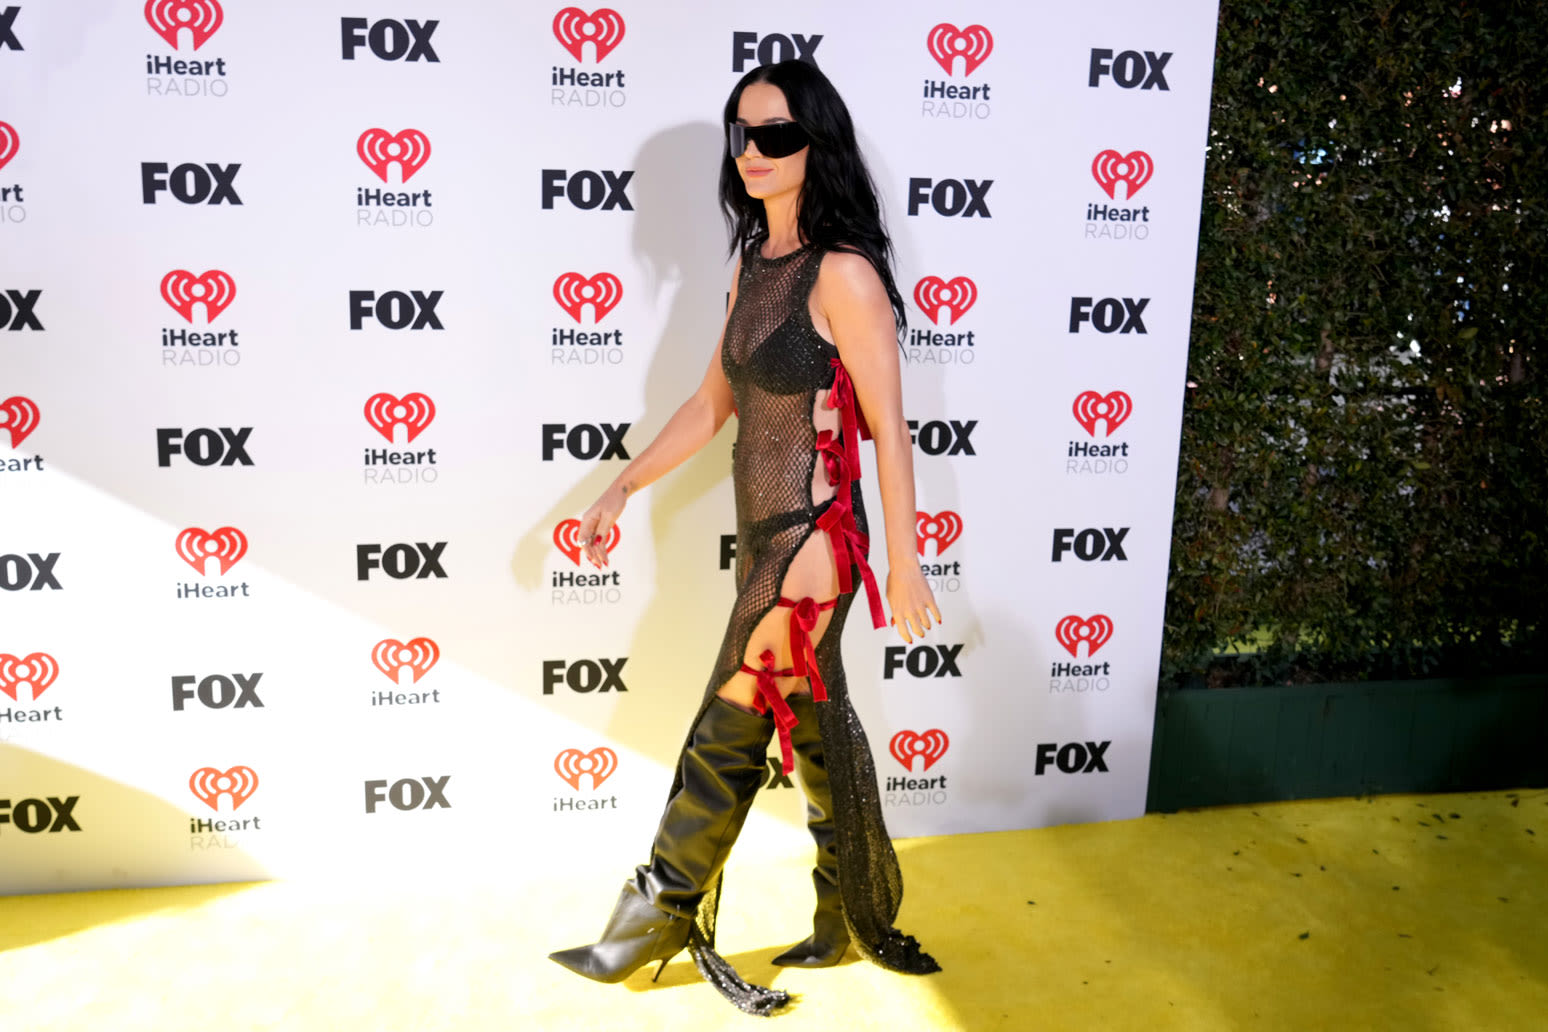 10 Must-Have Pairs of Shoes From Katy Perry’s Footwear Line